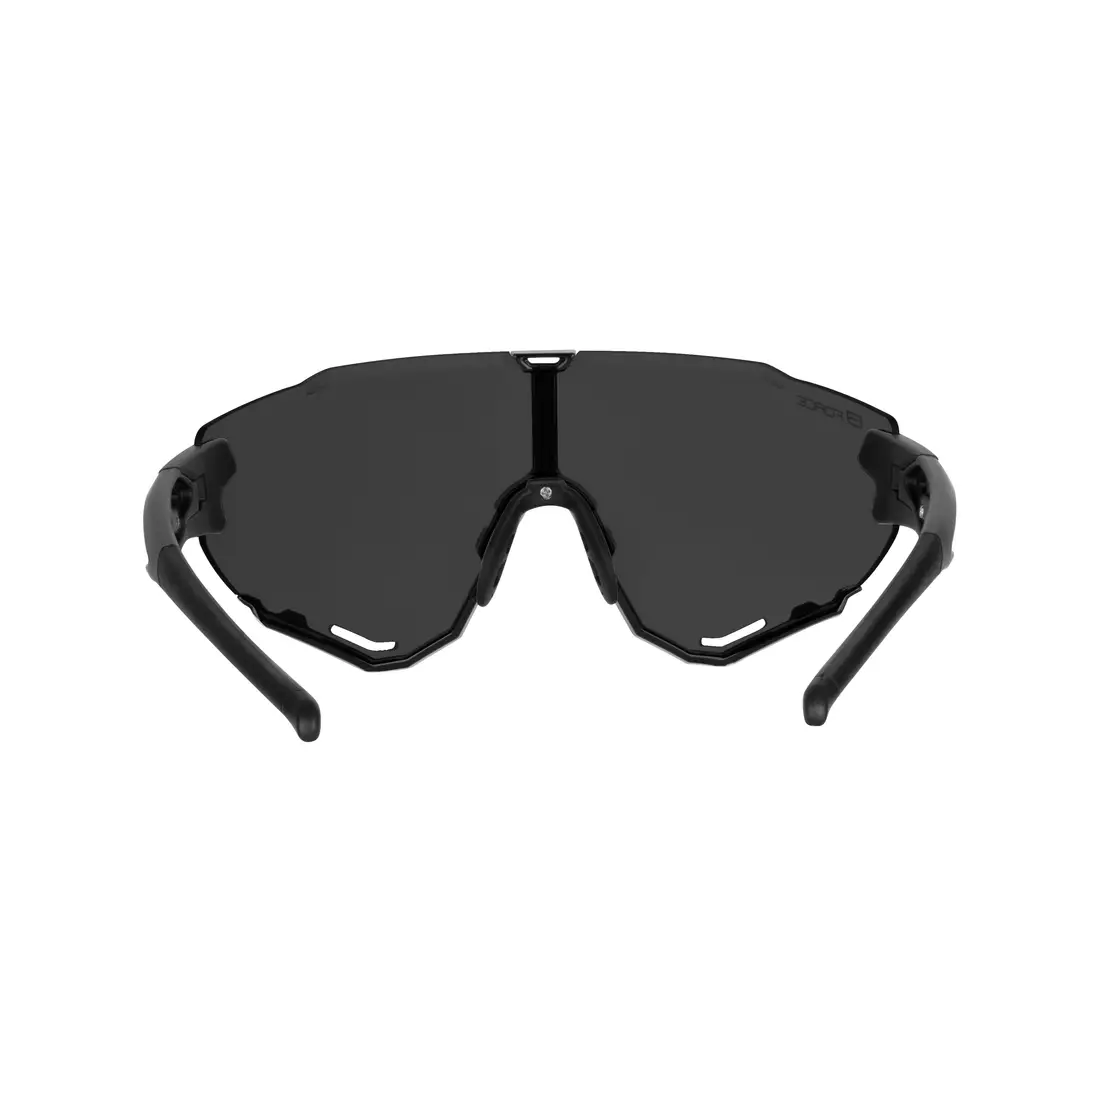 FORCE cycling / sports glasses CREED black, 91181